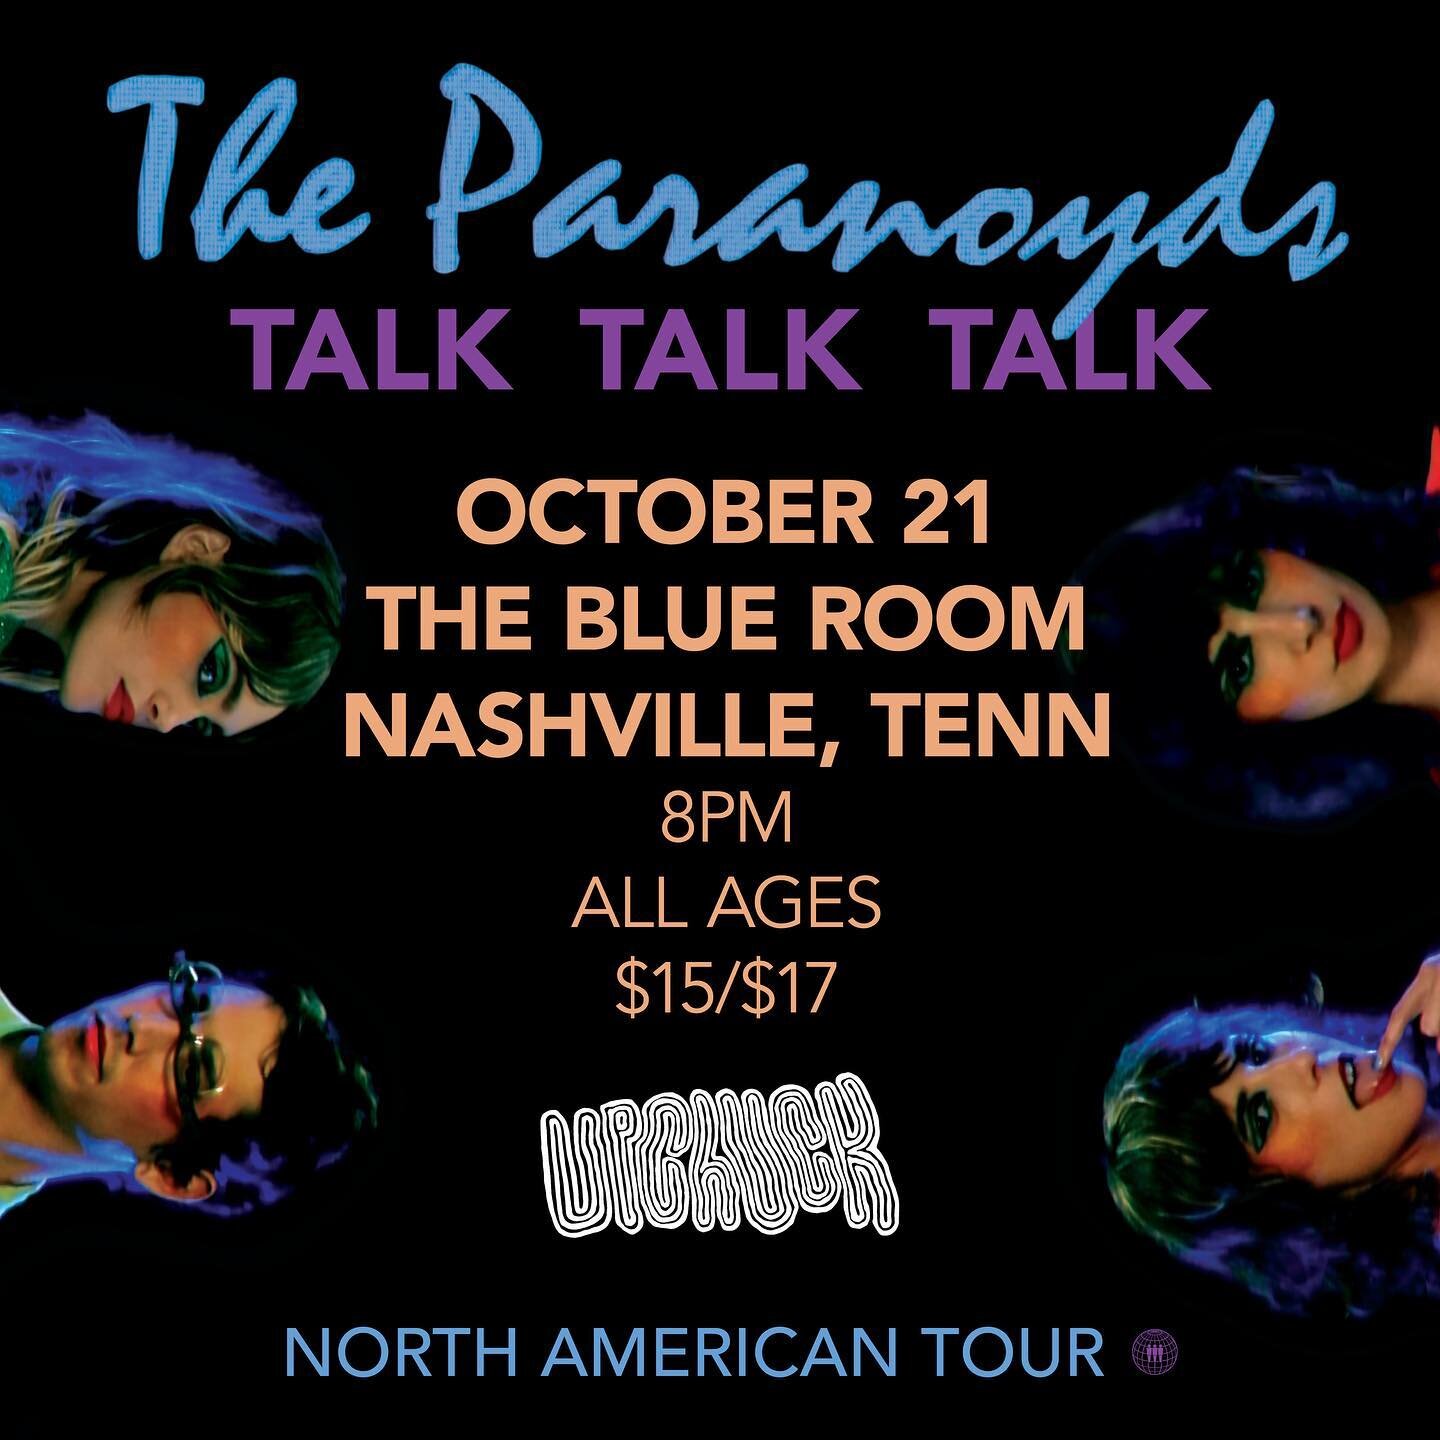 @theparanoyds come to town on October 21st at @theblueroomnashville with ATL&rsquo;s @_upchuck_. Enter to win two tickets to the show on our website, link in bio! Deadline to enter is October 9th at 5pm CT.